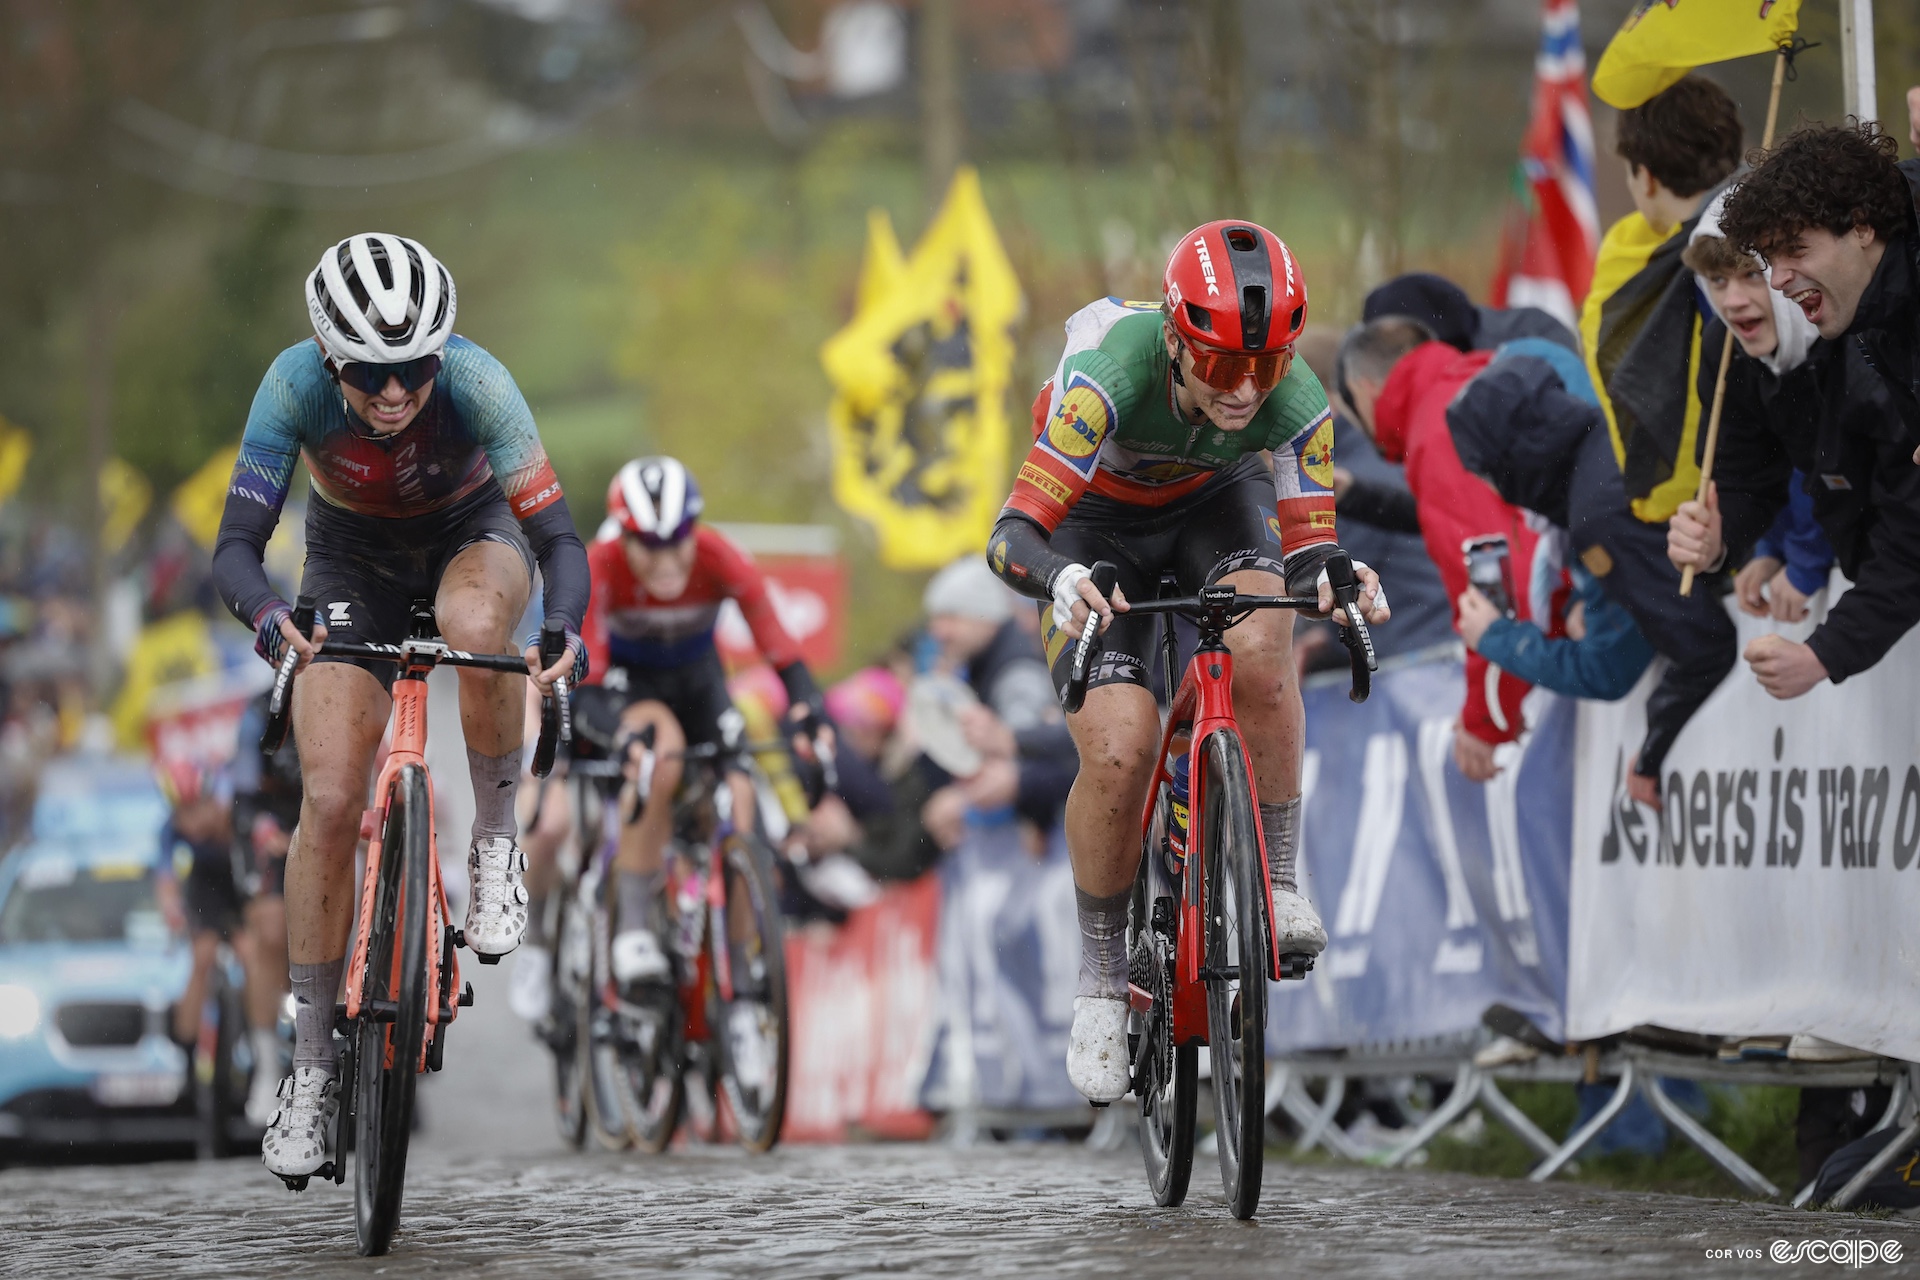 Two women race bikes over cobbled roads